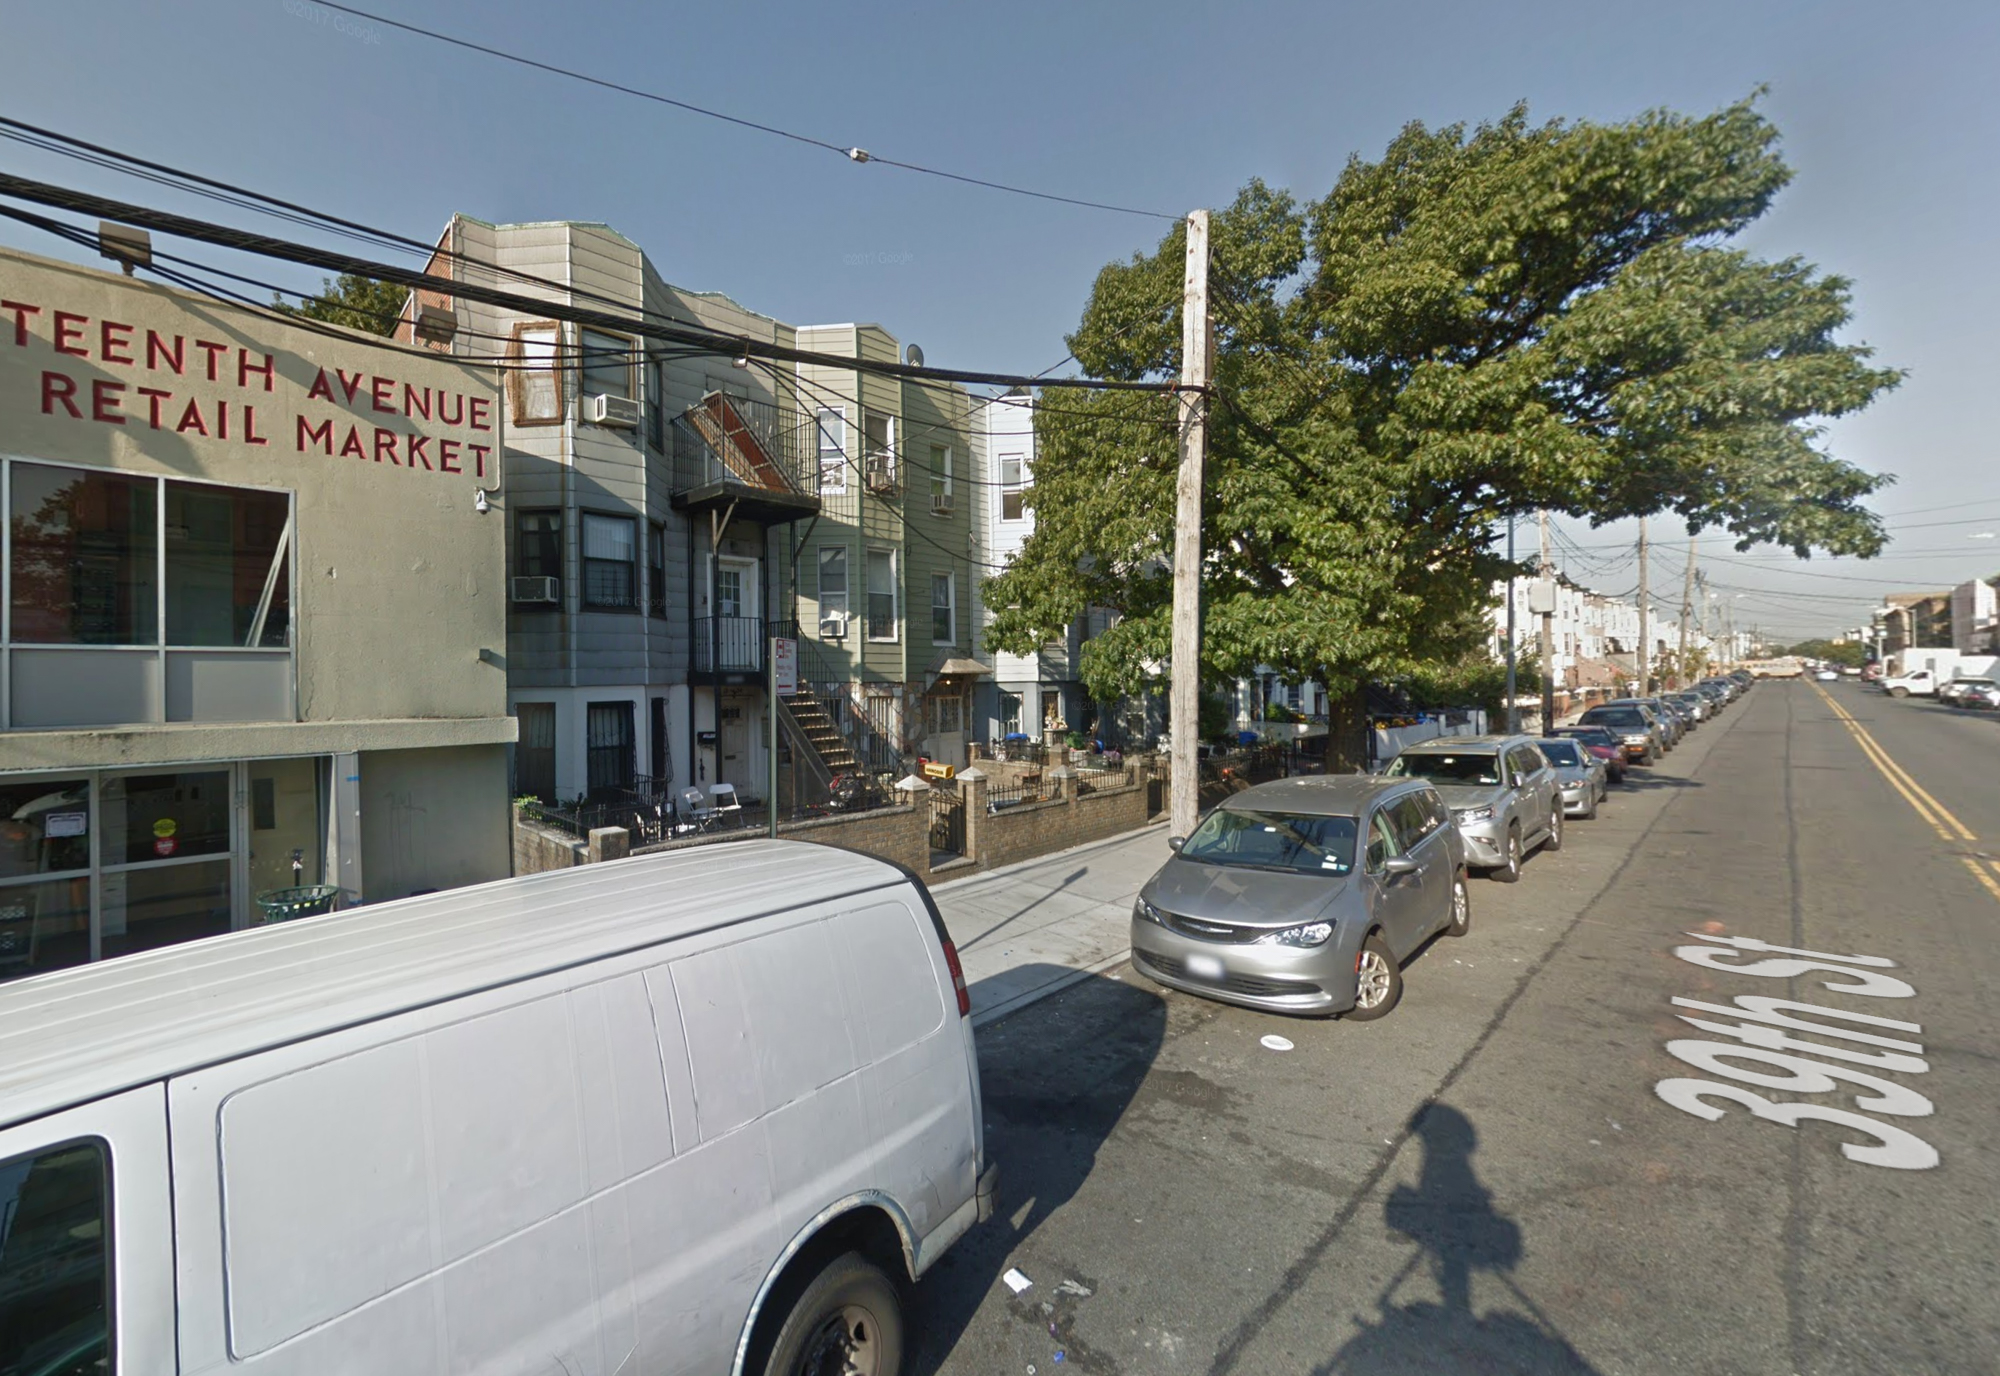 1252 39th Street, second building to the right of the retail market, via Google Maps